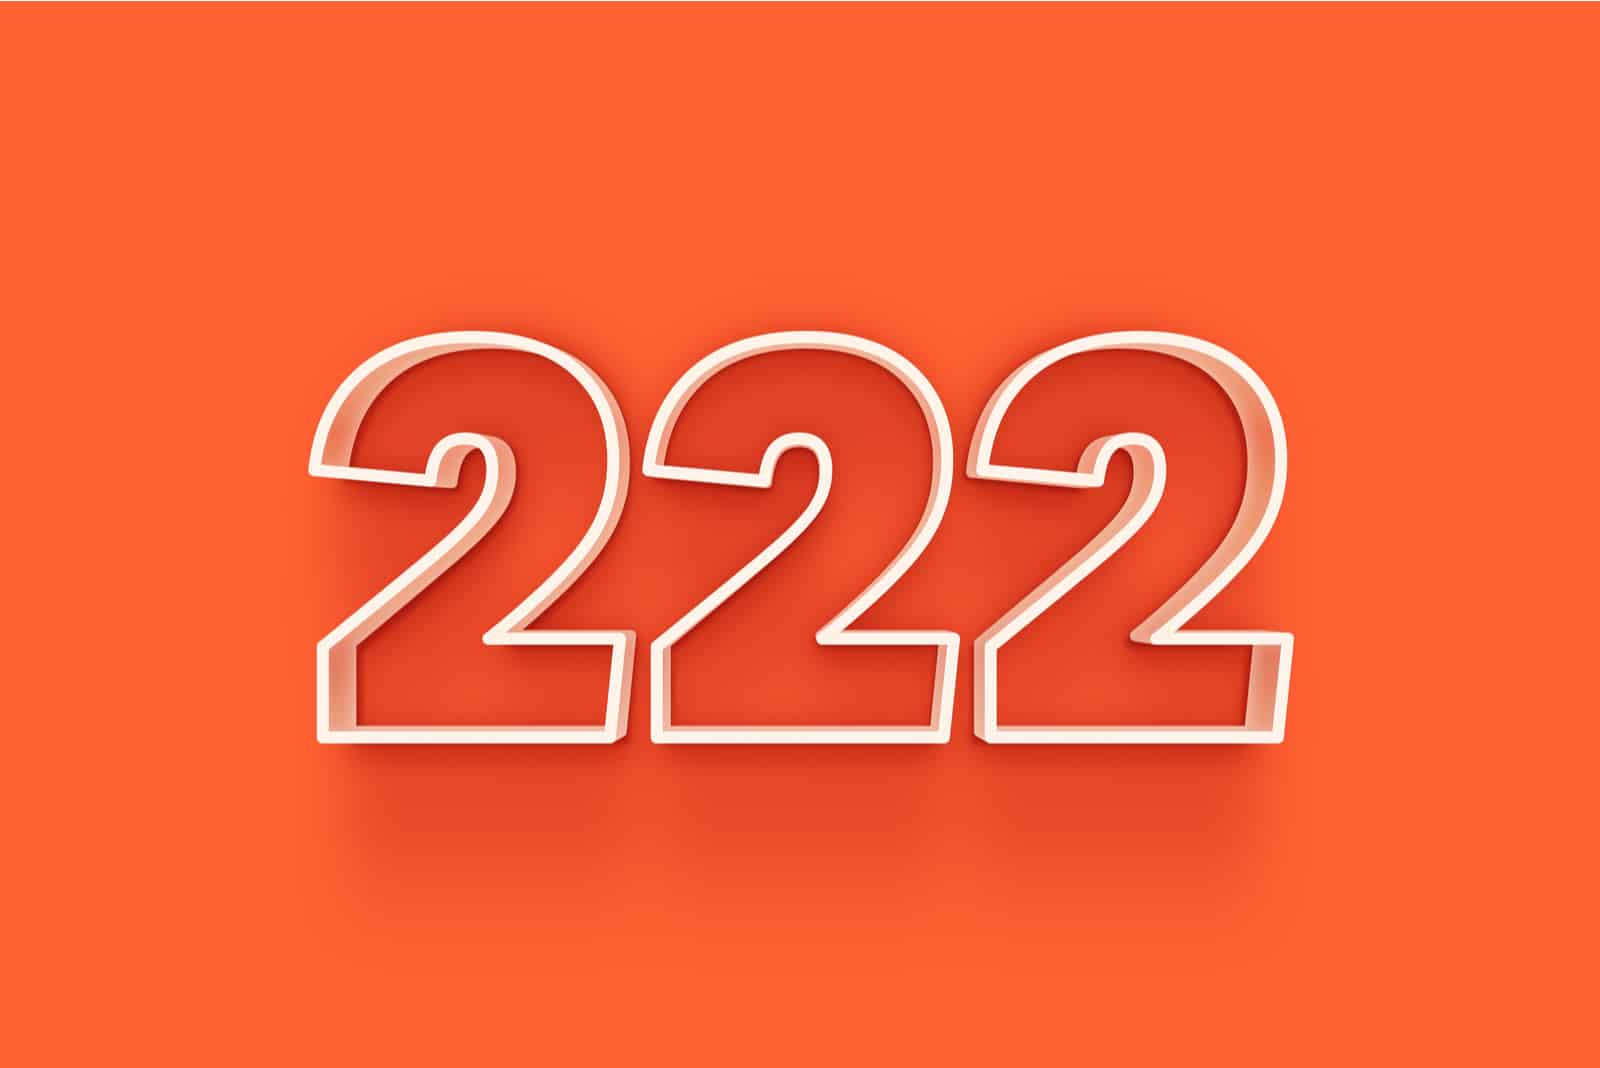 222 number on the red background